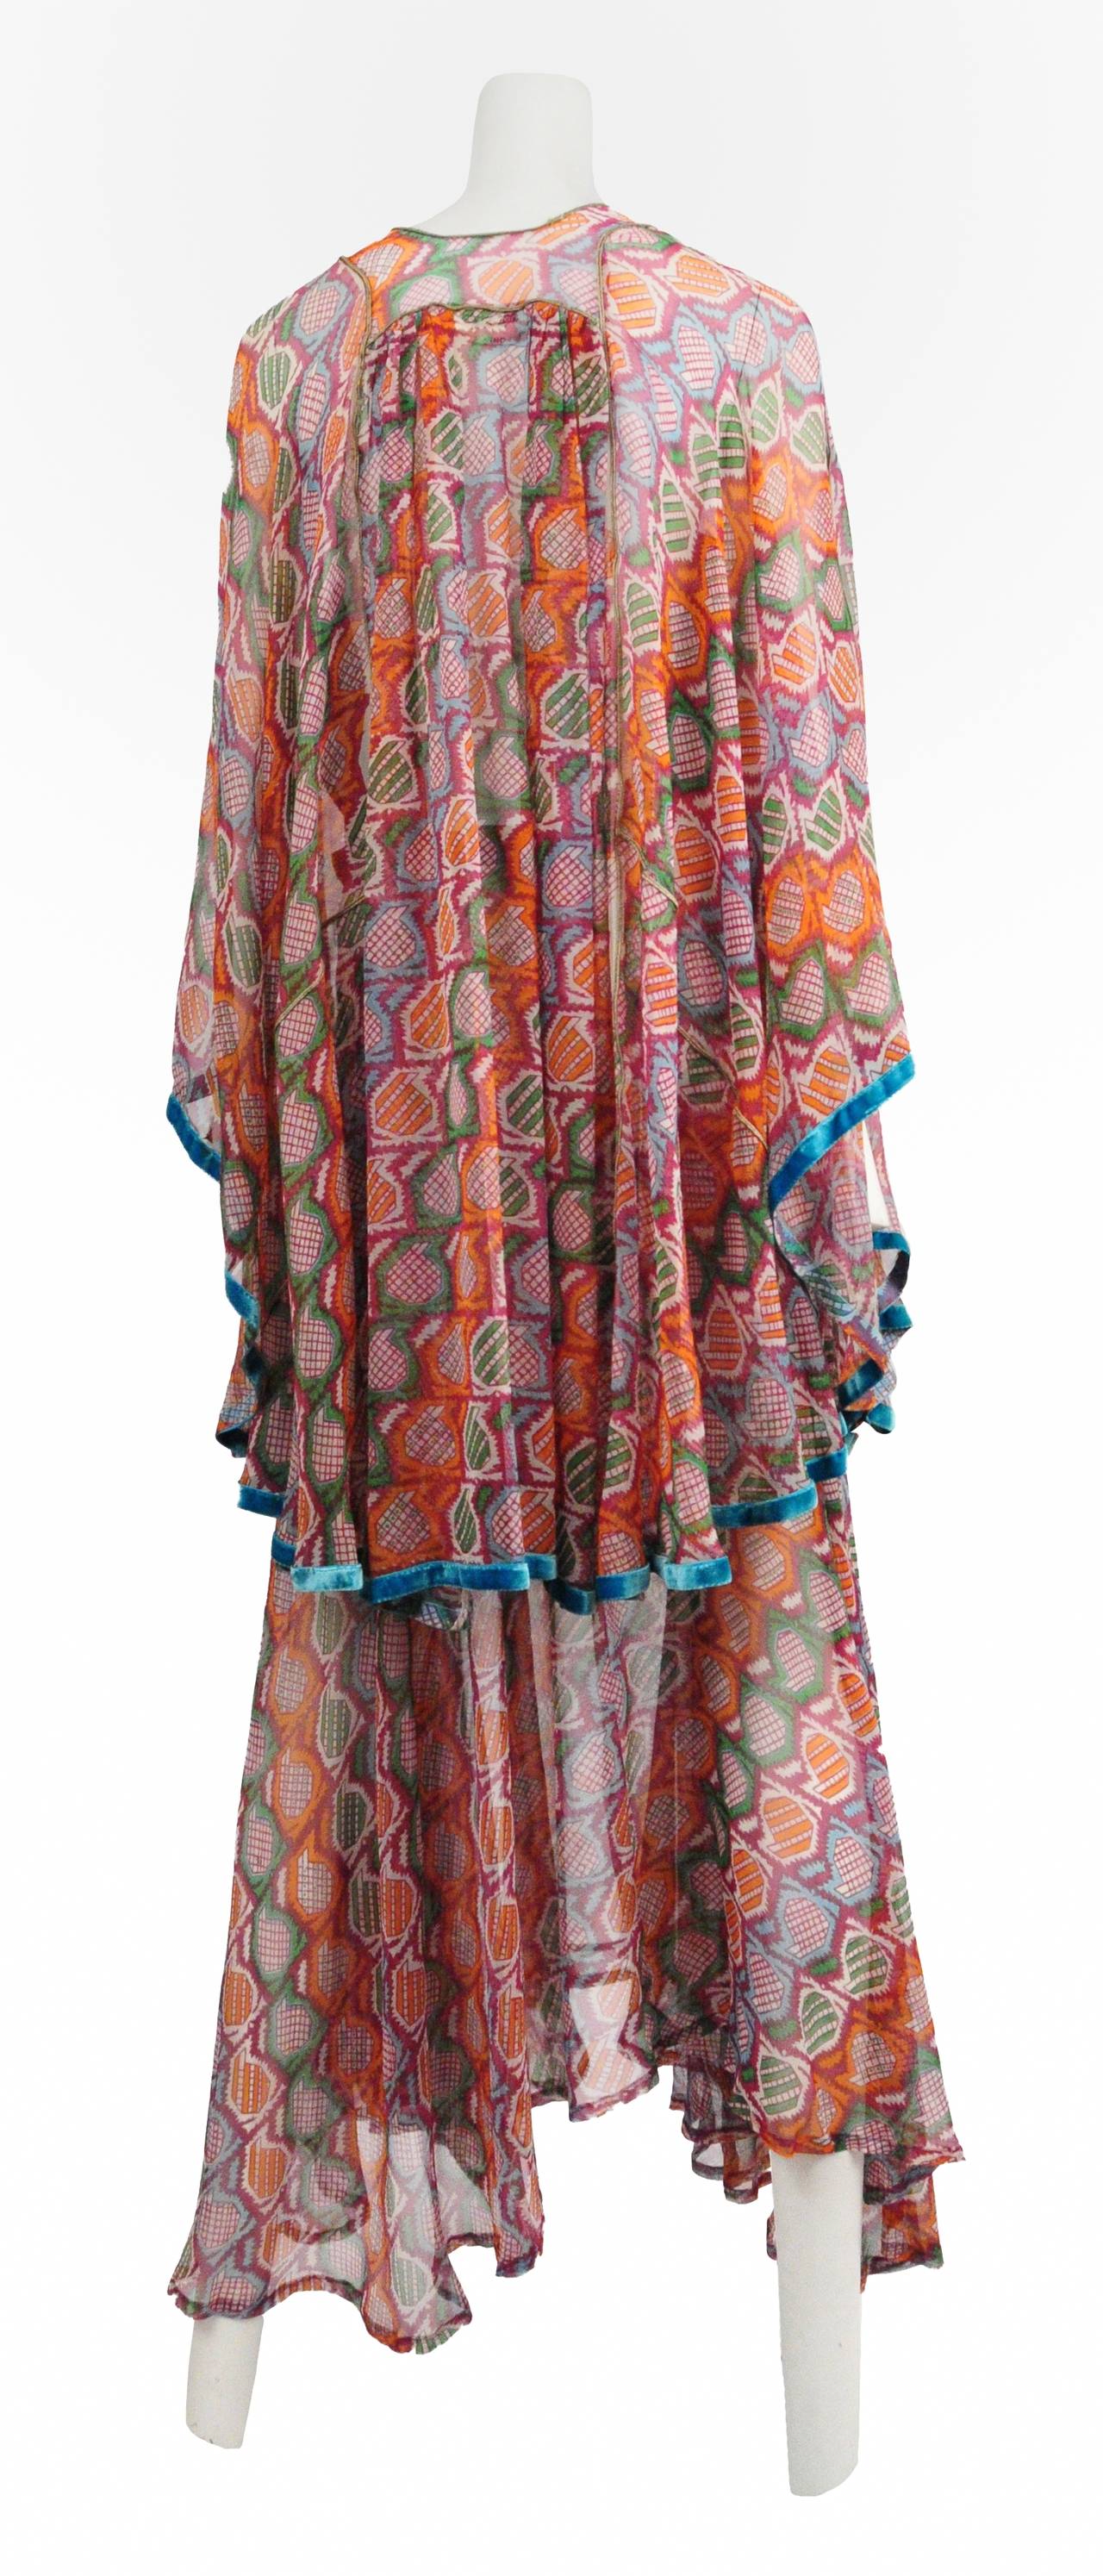 Vintage Thea Porter mixed print two piece ensemble with caftan style top paired with handkerchief hem skirt.